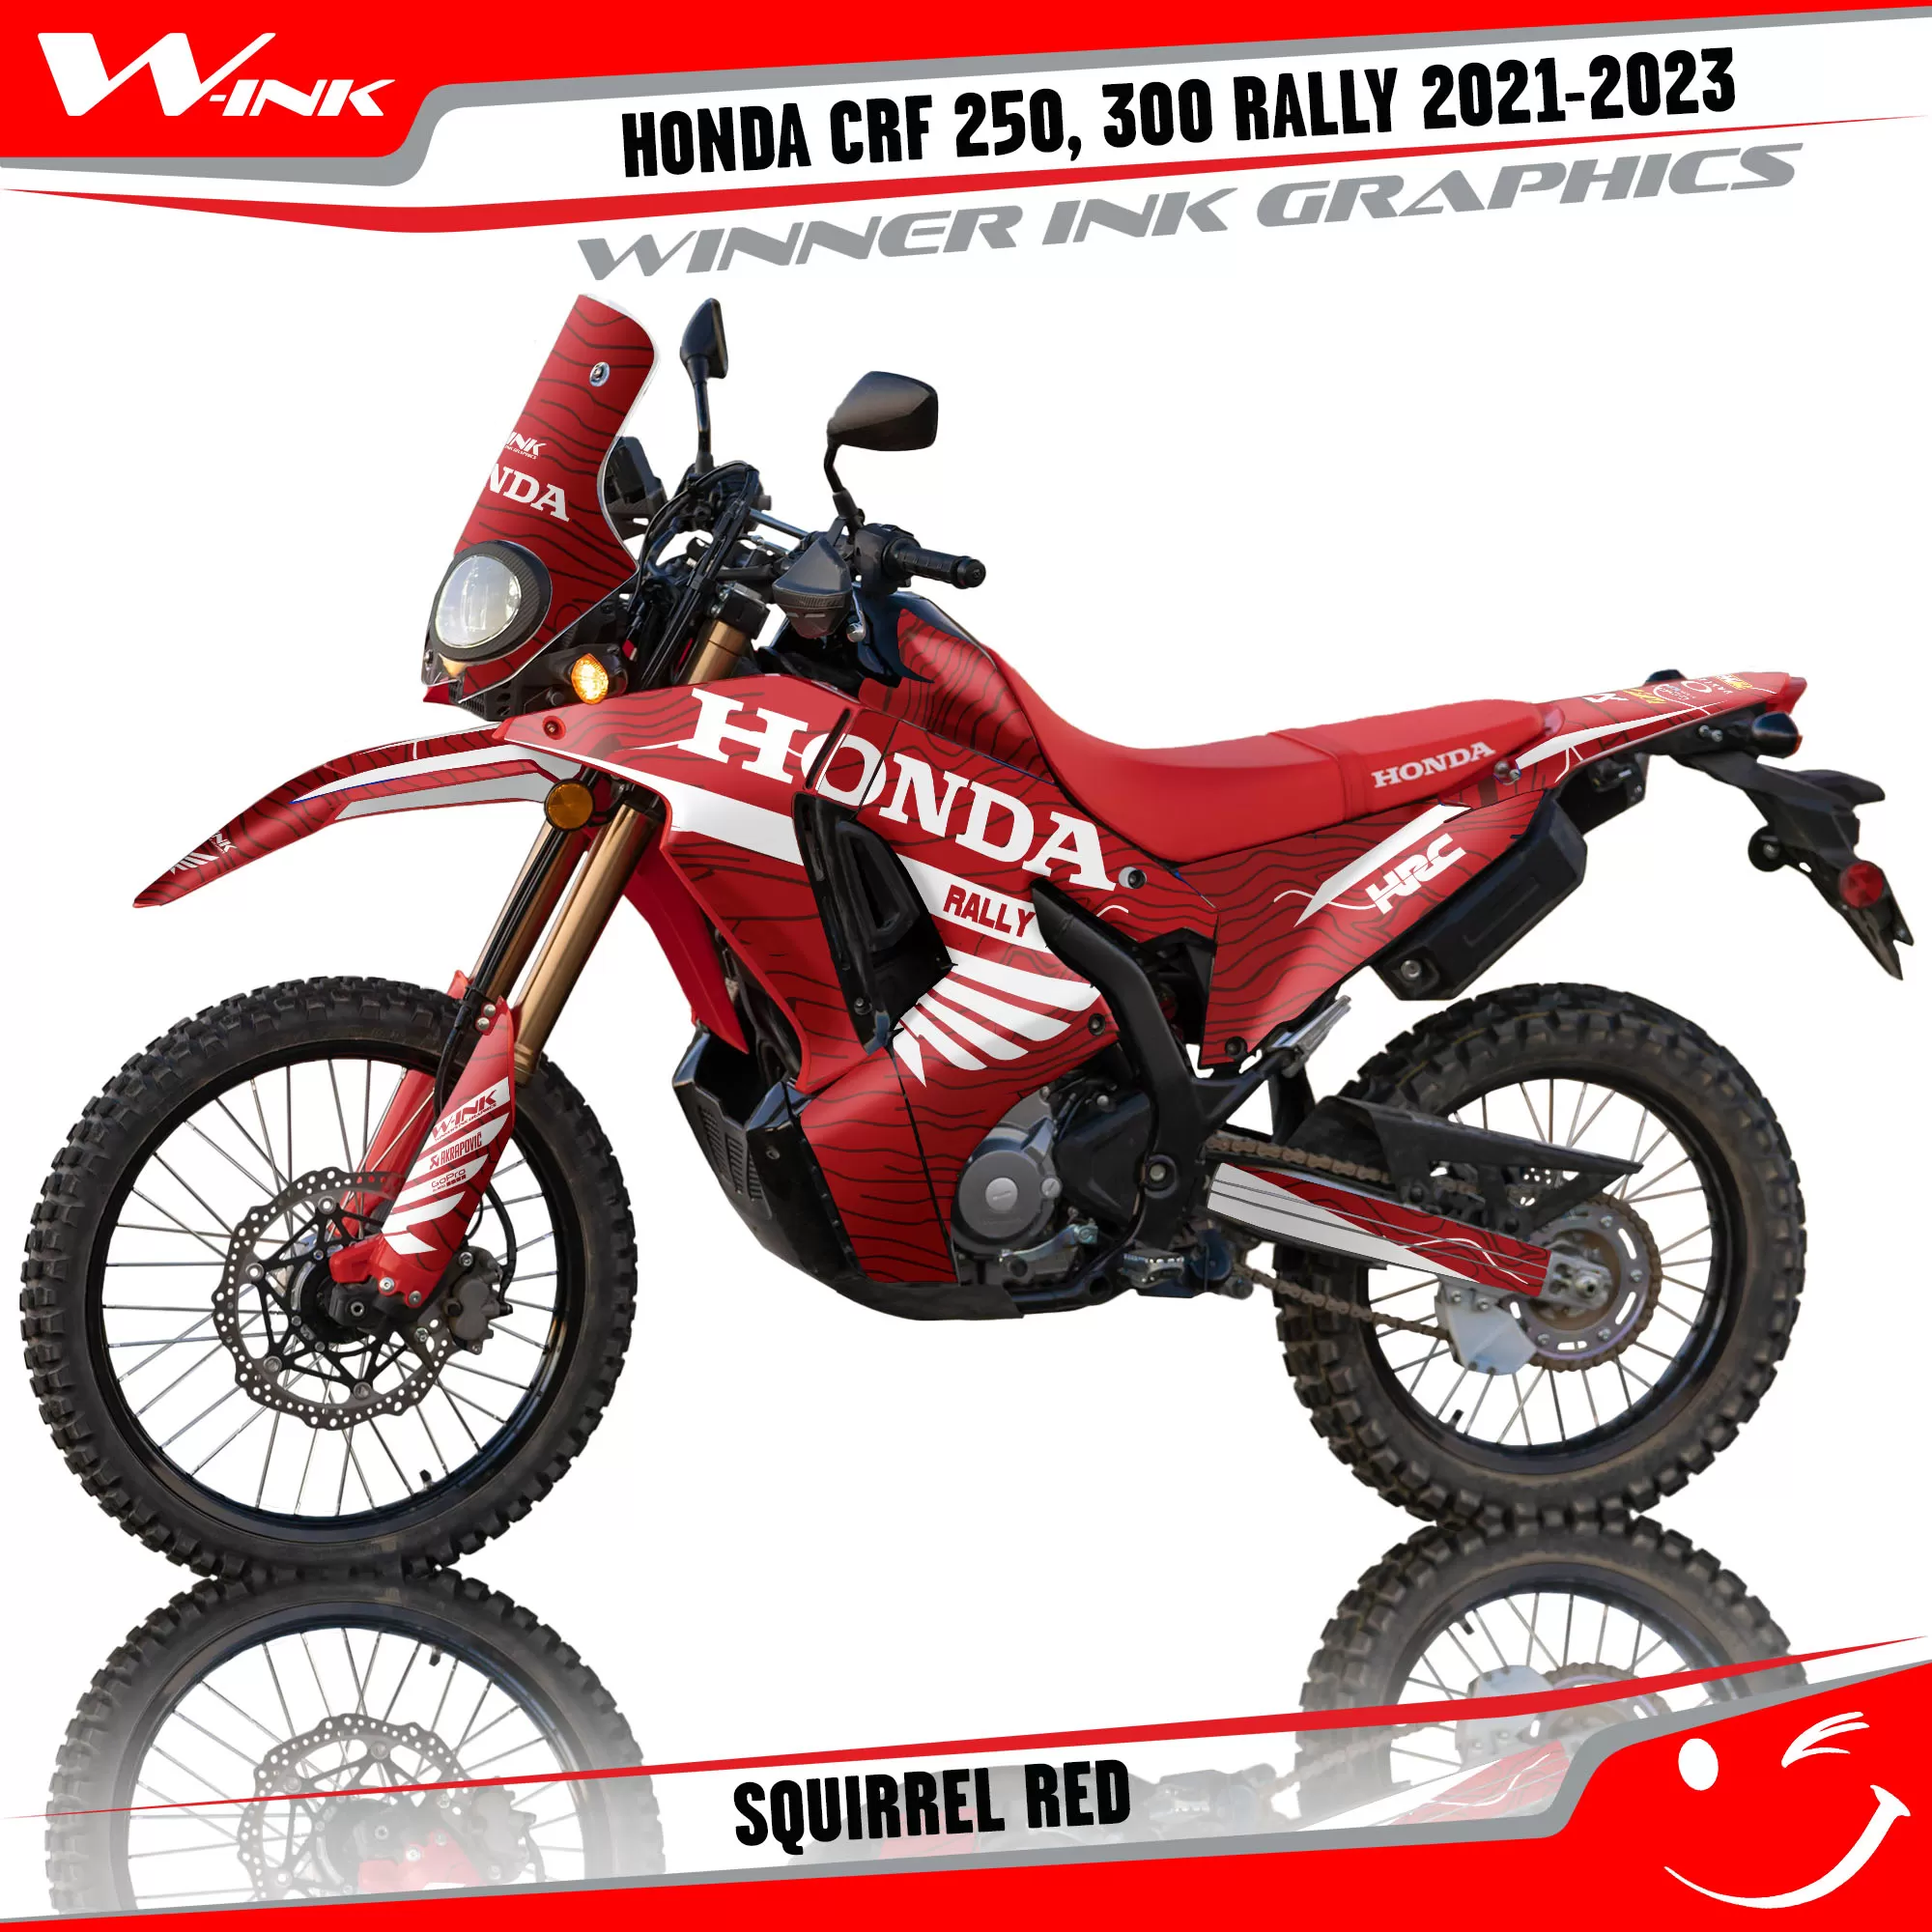 Decoration kit for Honda CRF 250 300 Rally 2021-2023 Squirrel